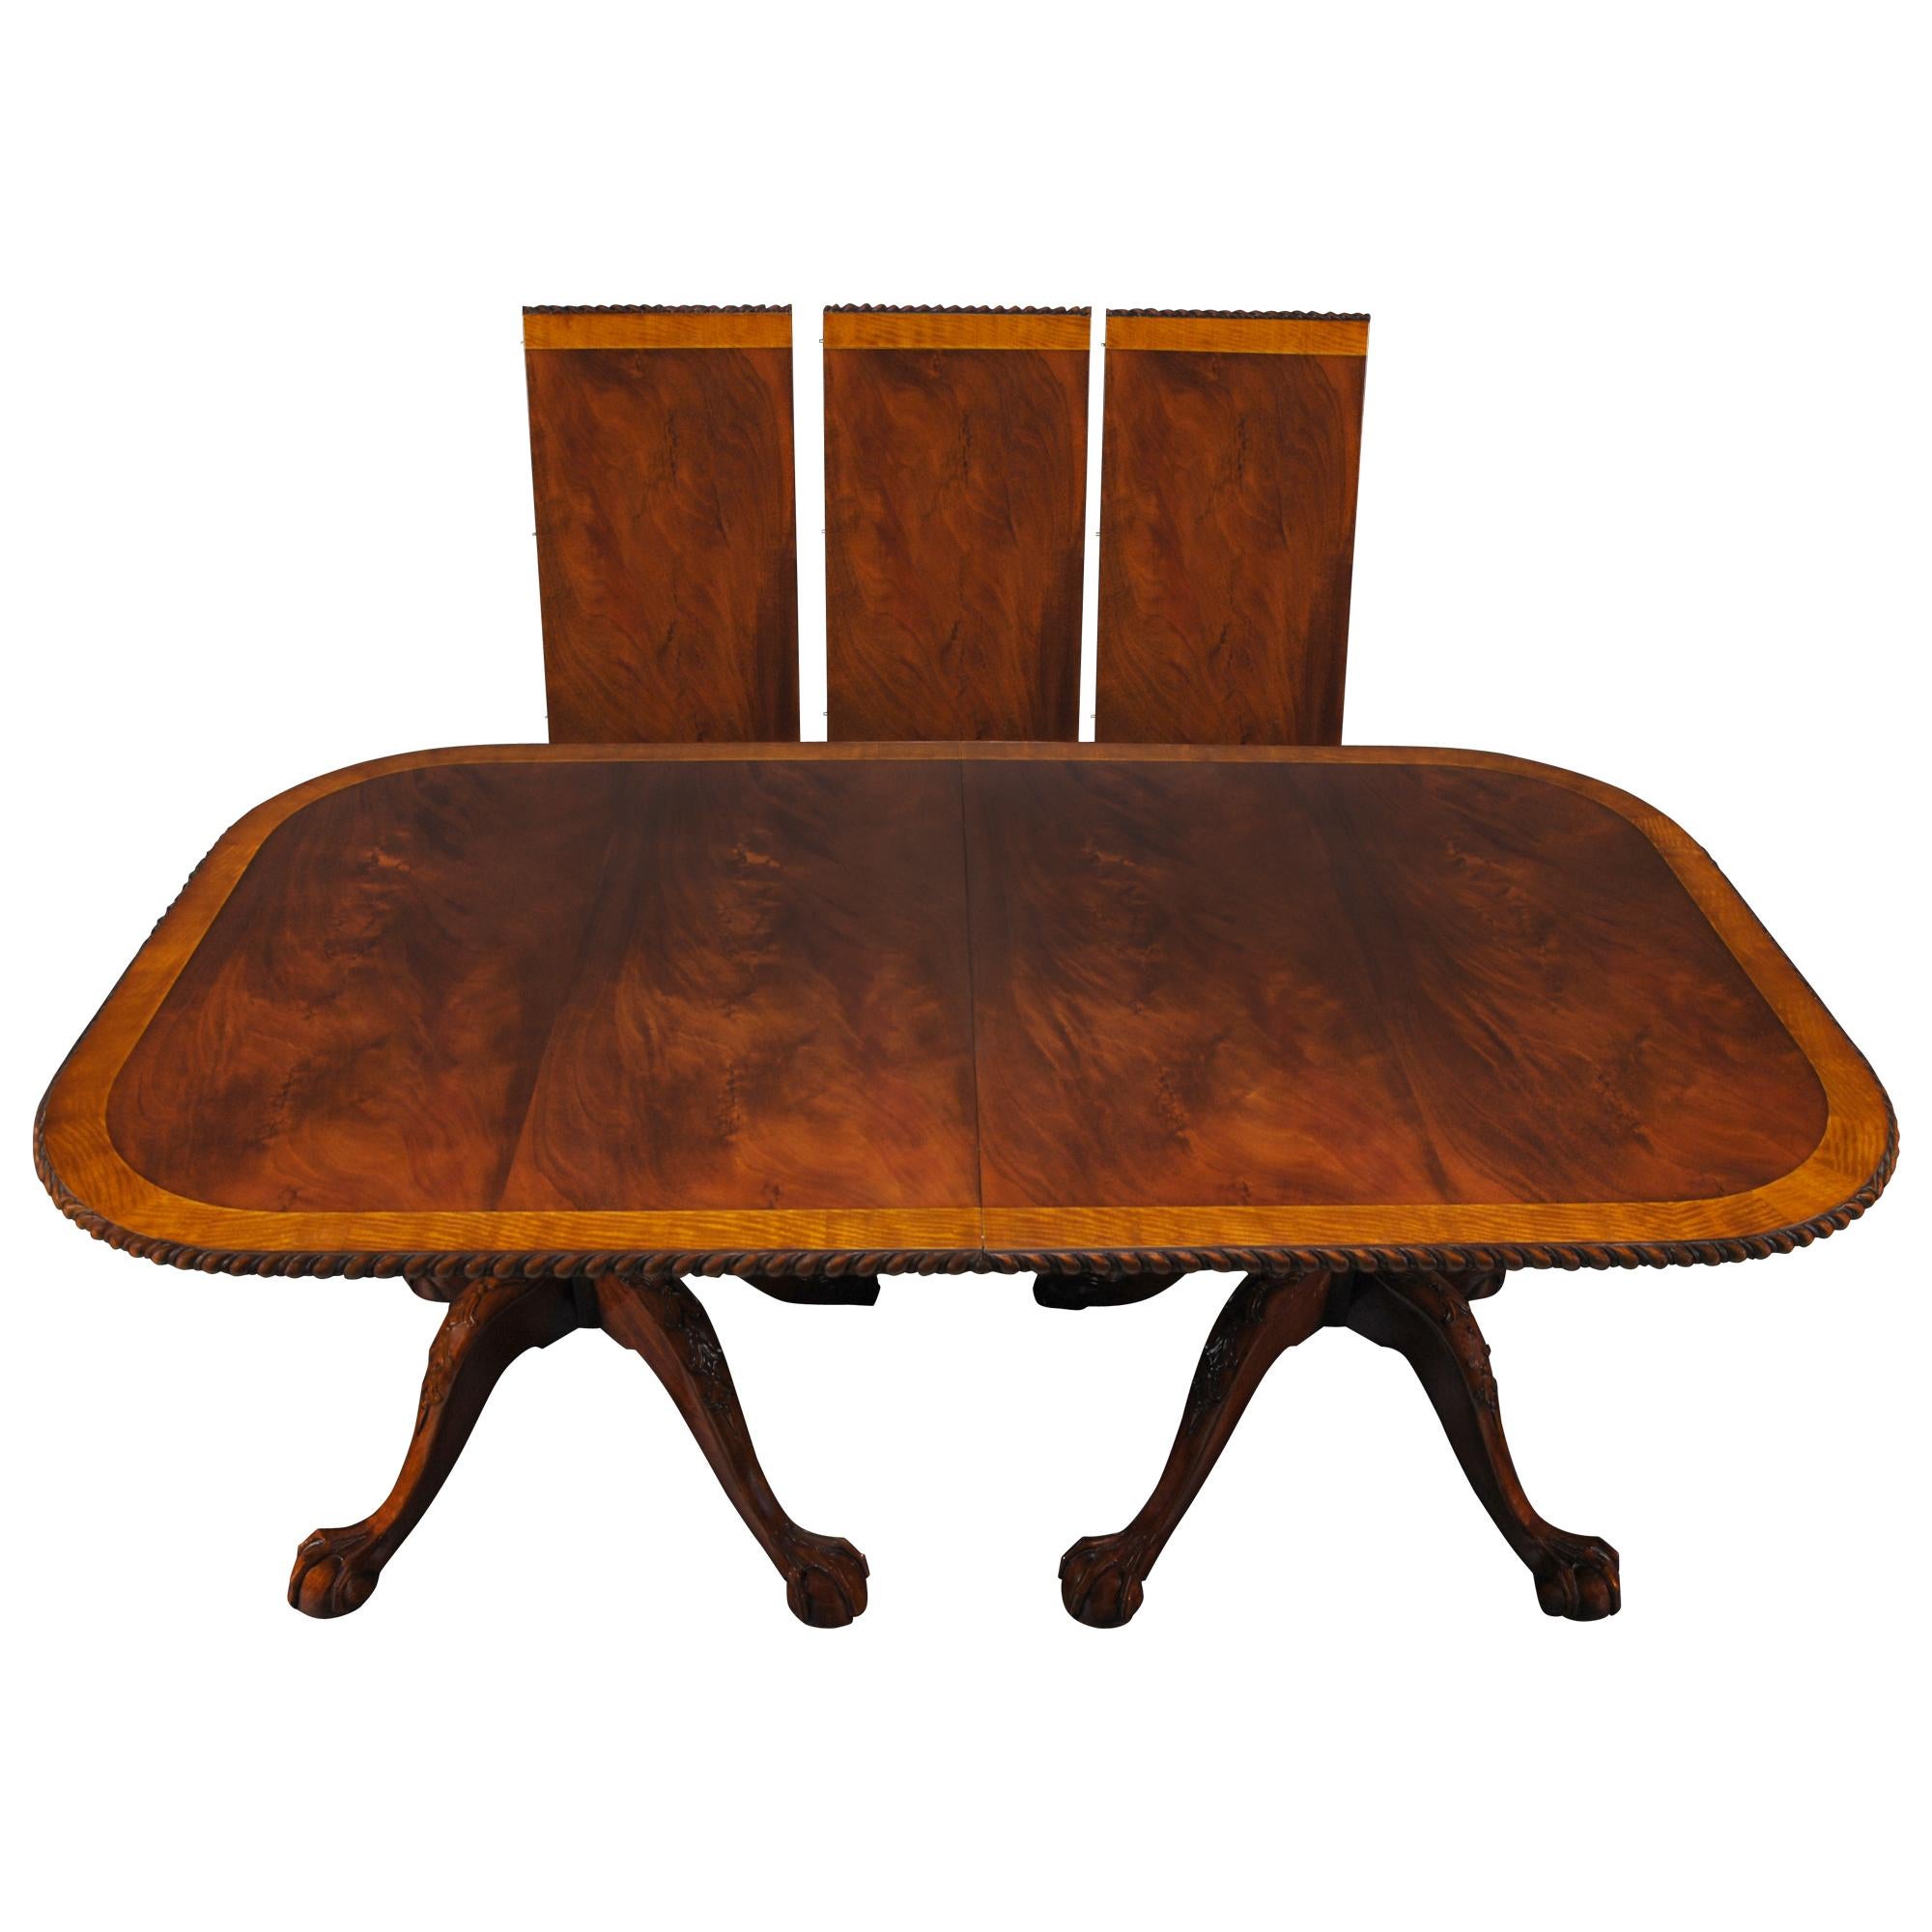 This is the version of the traditional Ball and Claw Chippendale Dining Table. It is a Chippendale inspired dining table featuring all of the finest elements of eighteenth century design including satinwood banding, fine quality mahogany veneers on